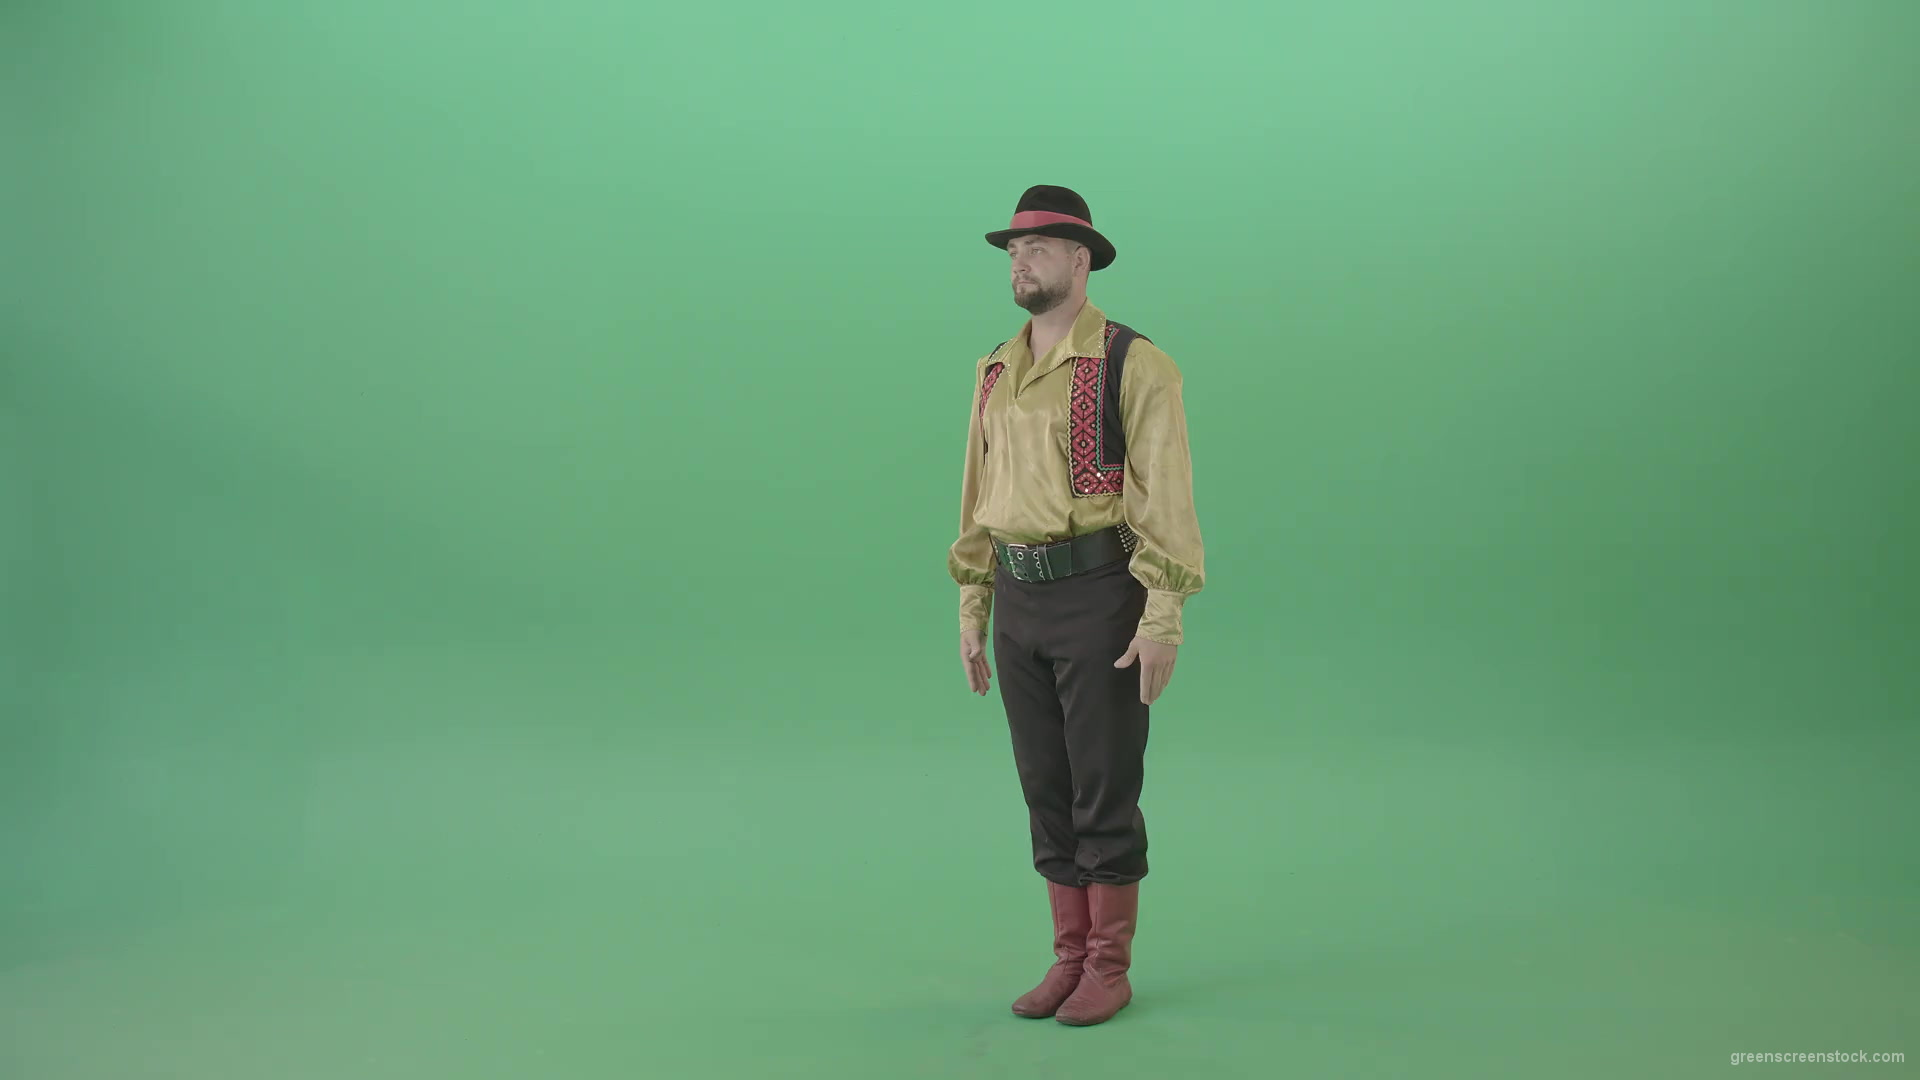 Balcan-gipsy-man-dancer-showing-clapping-moves-isolated-on-green-screen-4K-Video-Footage-1920_001 Green Screen Stock